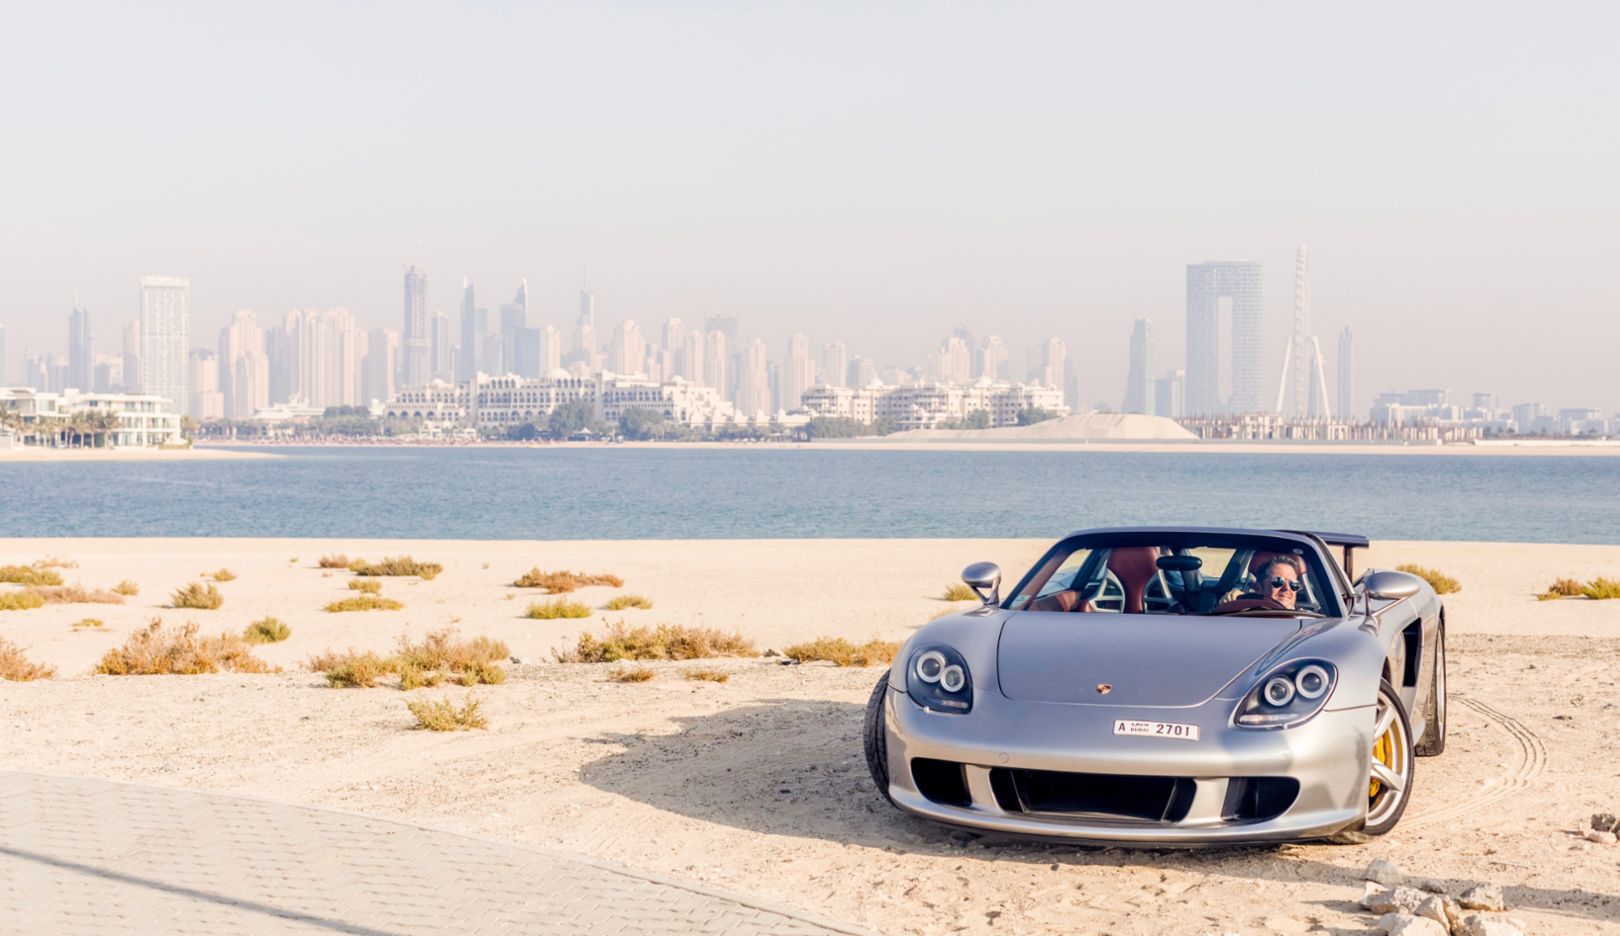 With the Porsche Carrera GT, Karim Al Azhari also owns one of the rare super sports cars. This curiosity cuts a particularly good figure against the Dubai skyline.